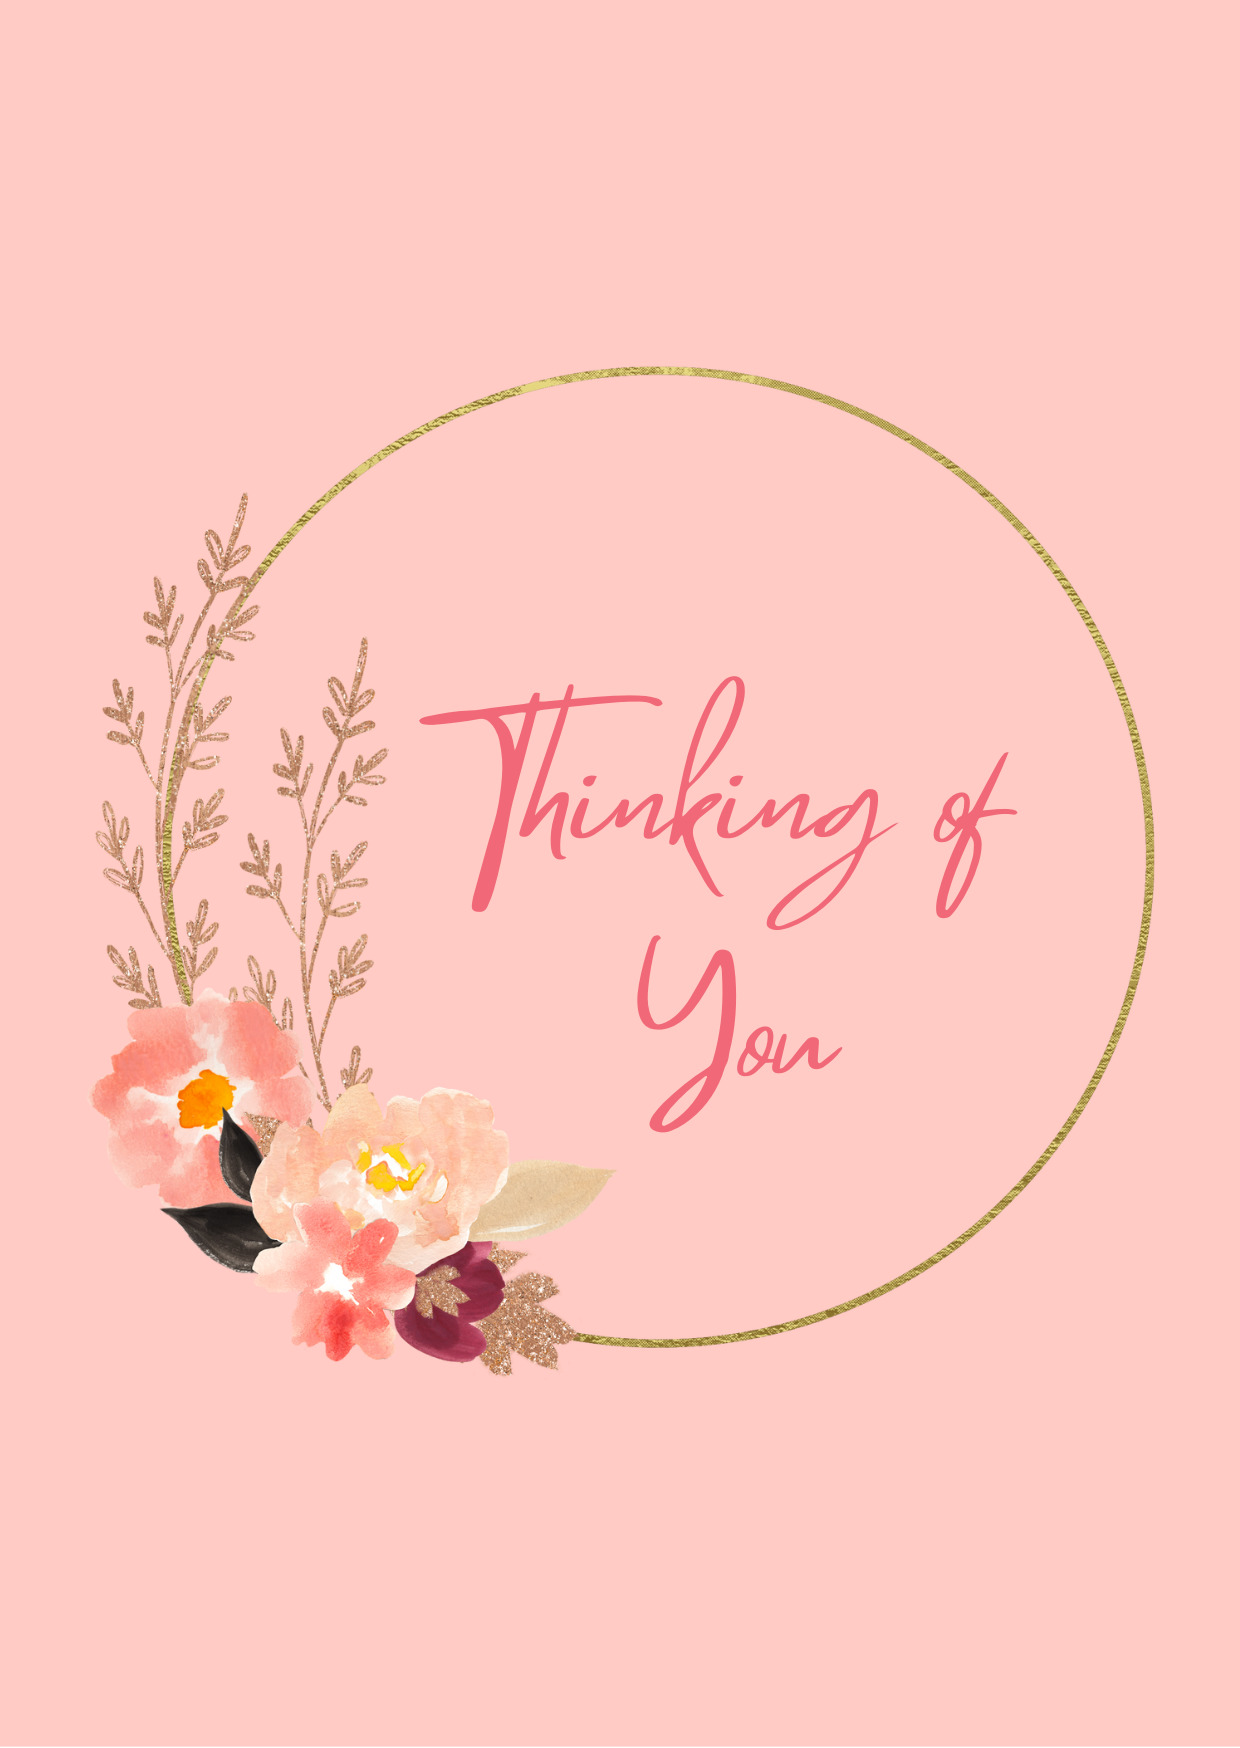 Thinking of You +£2.00